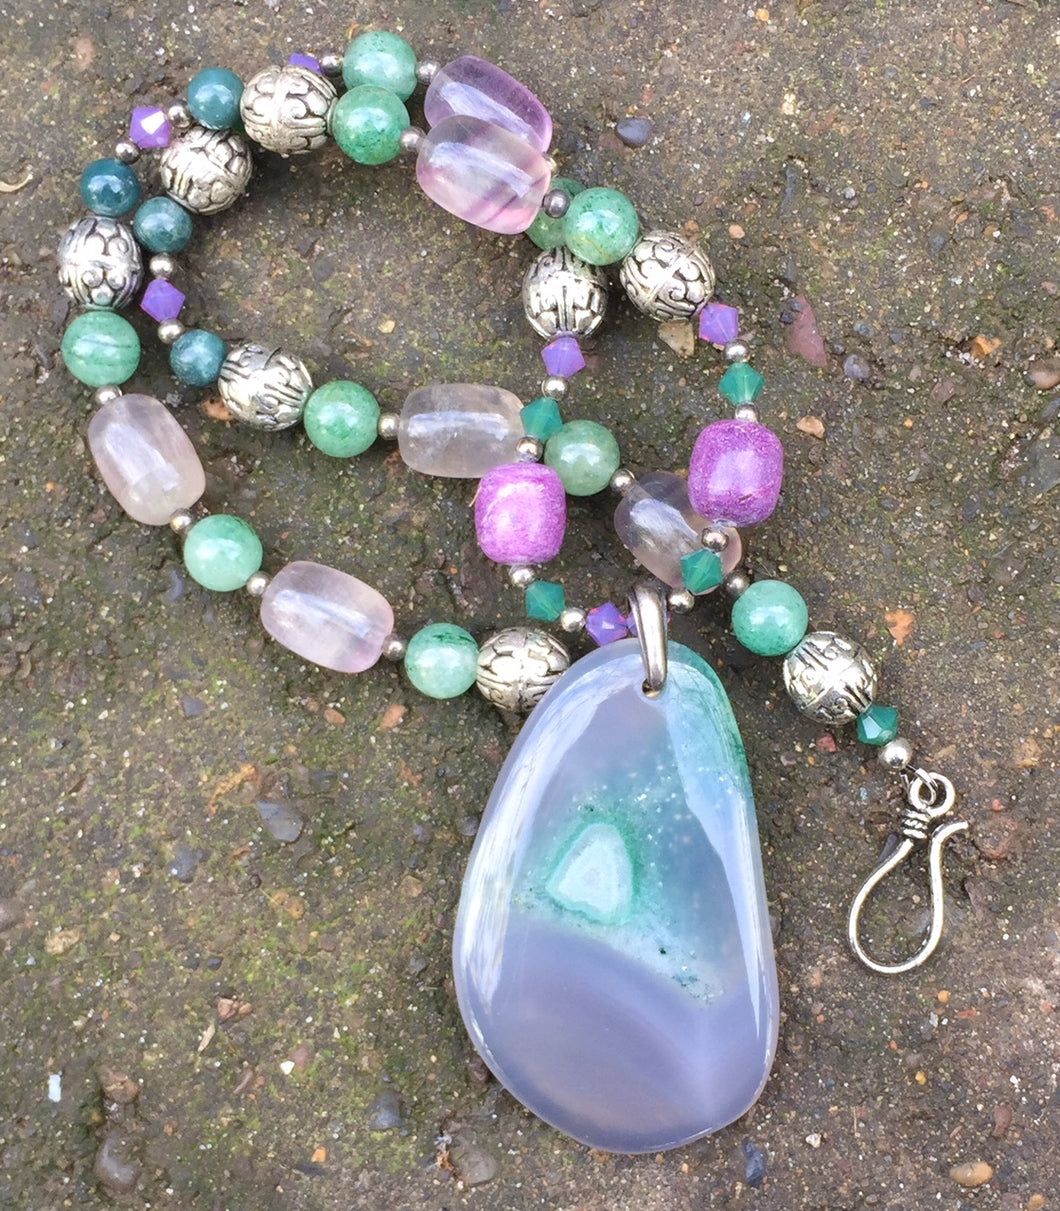 Mineral Necklace - Druzy Agate with Green Aventurine and Fluorite